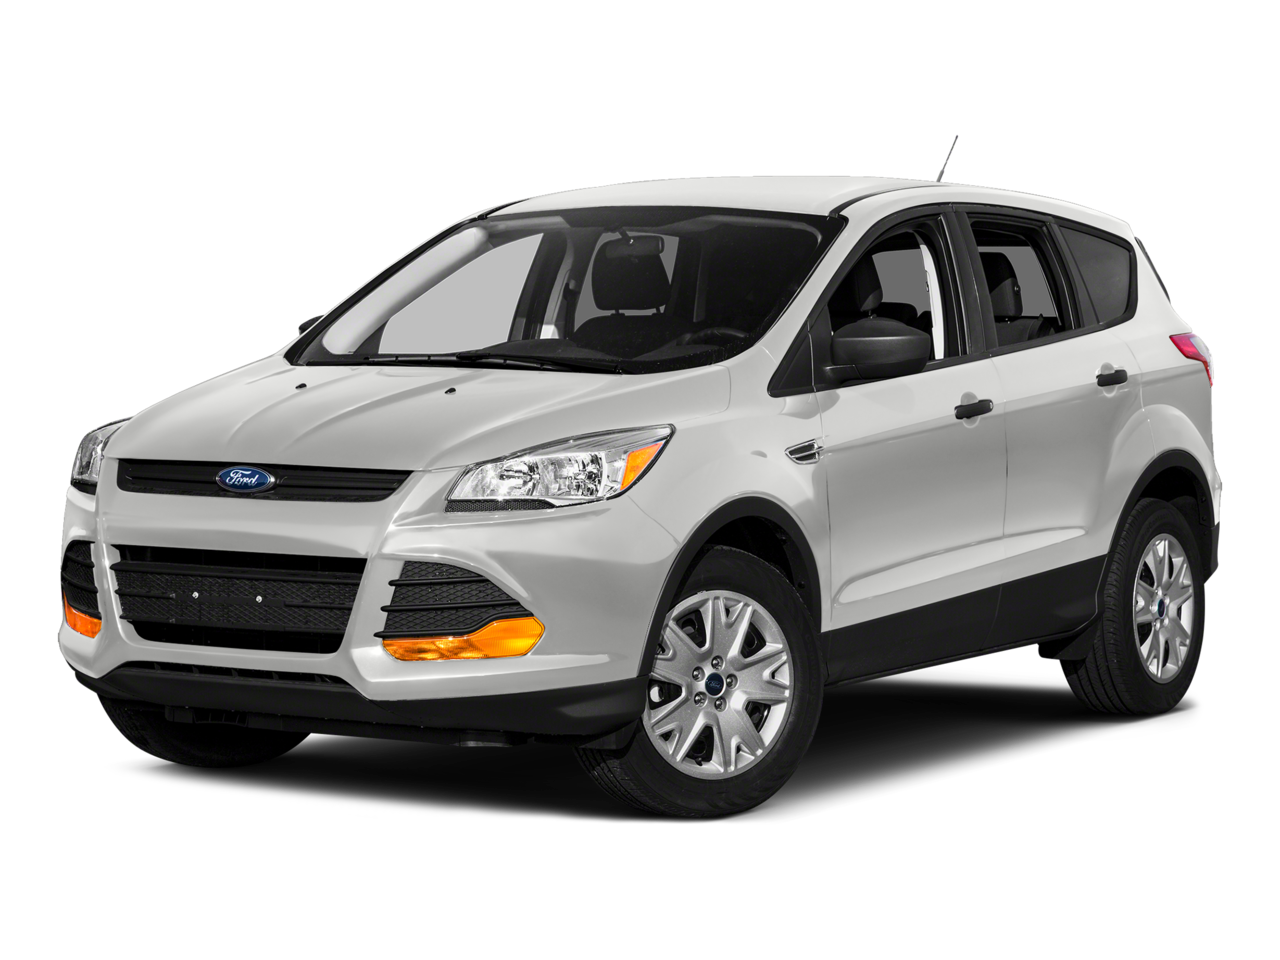 2015 Ford Escape Repair: Service and Maintenance Cost